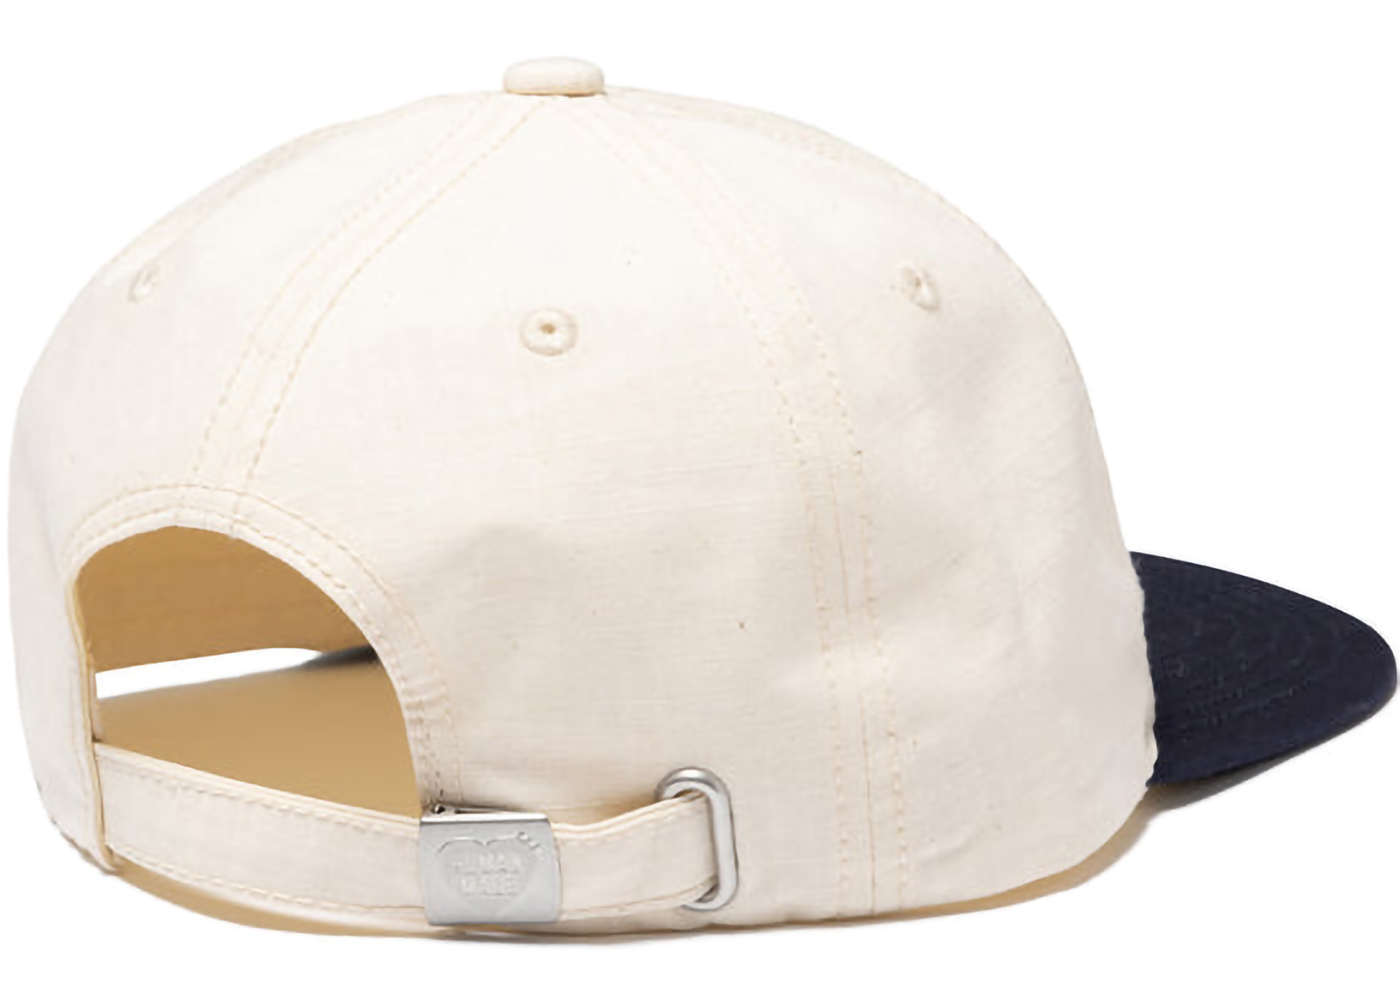 Human Made Dry Alls 5 Panel Rip Stop Cap White